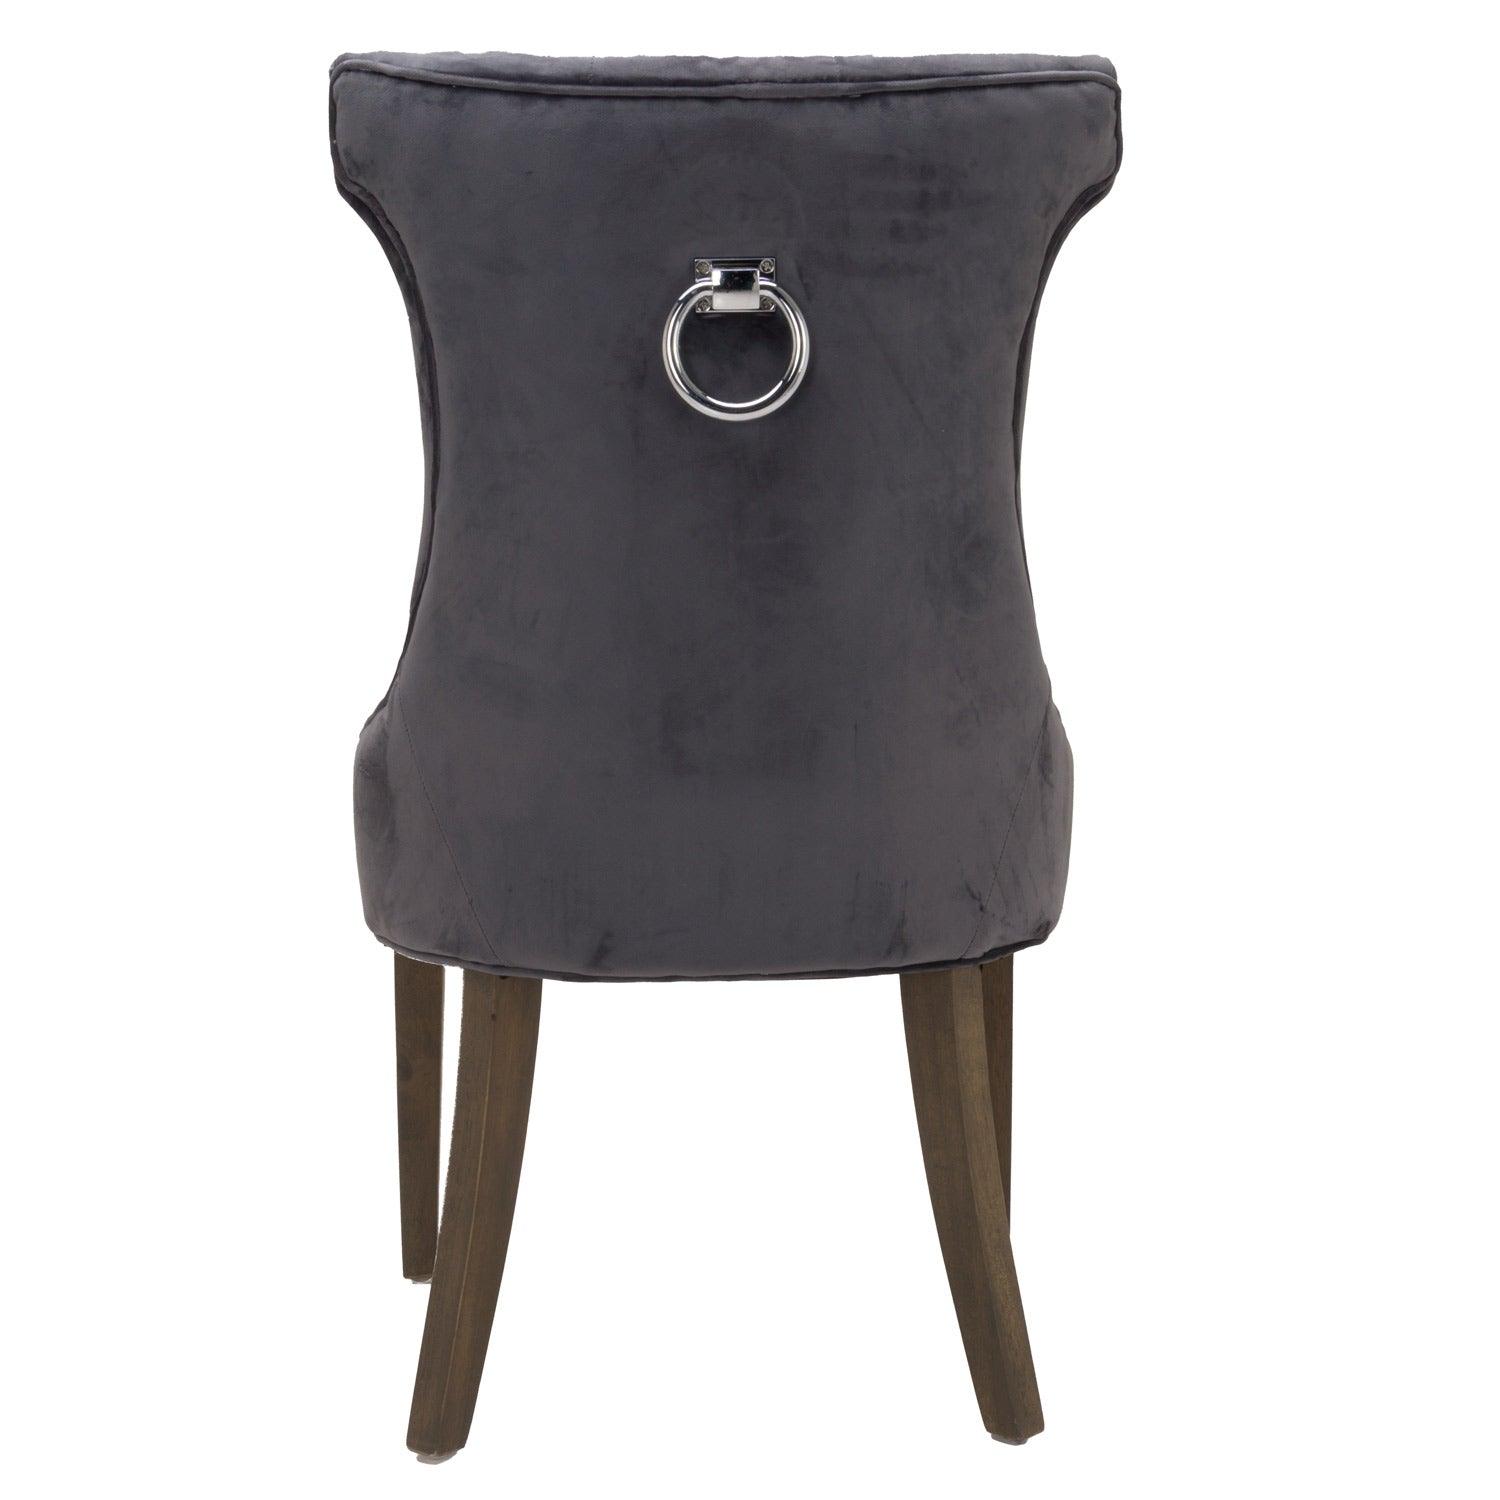 Knightsbridge High Wing Ring Backed Dining Chair - Vookoo Lifestyle